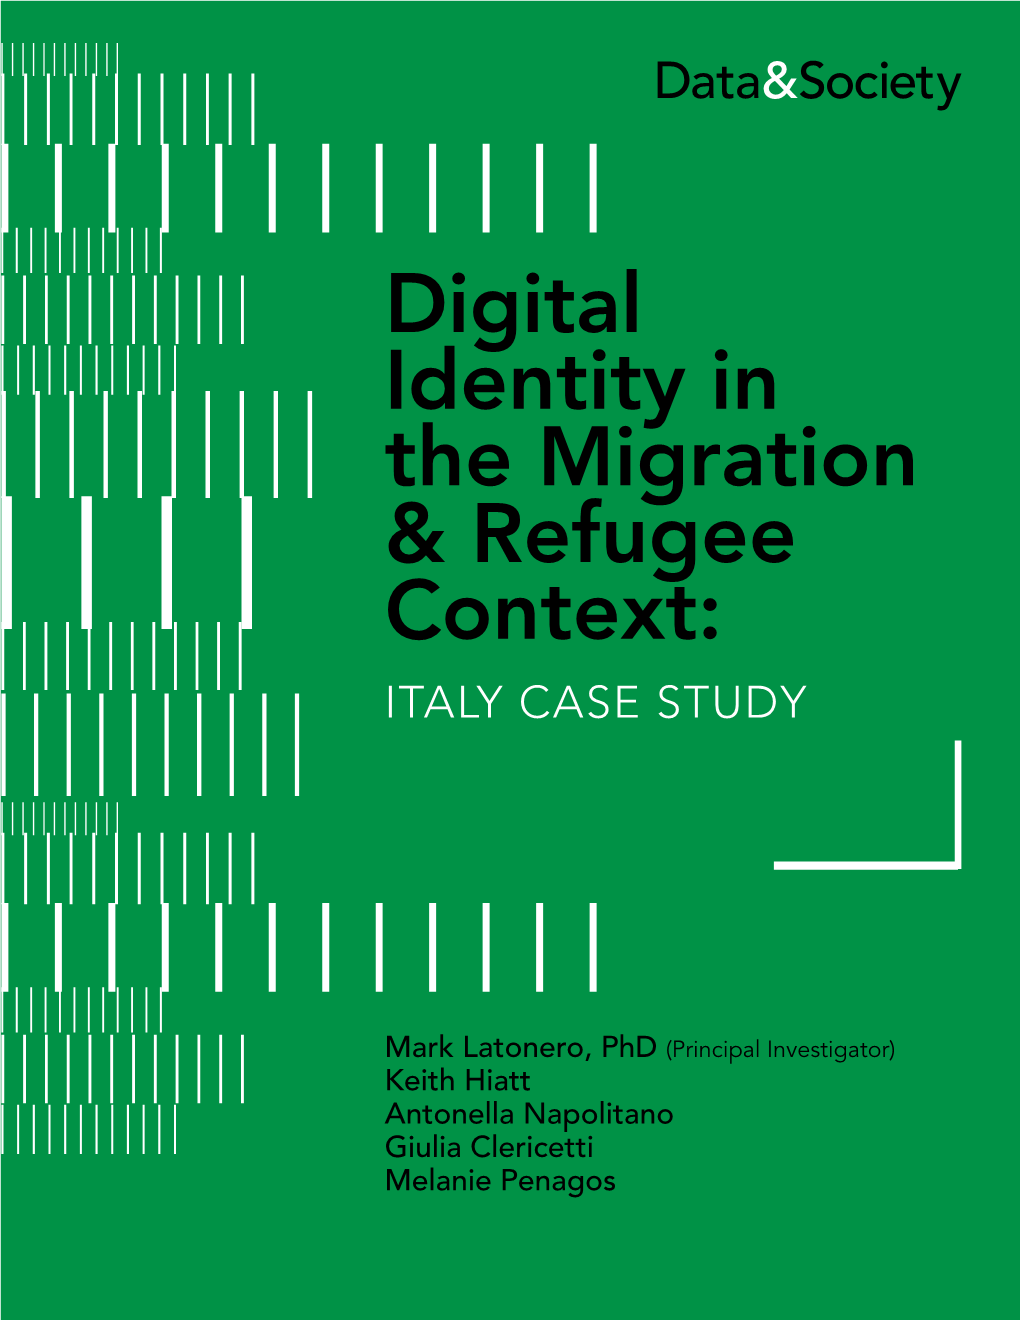 Digital Identity in the Migration & Refugee Context